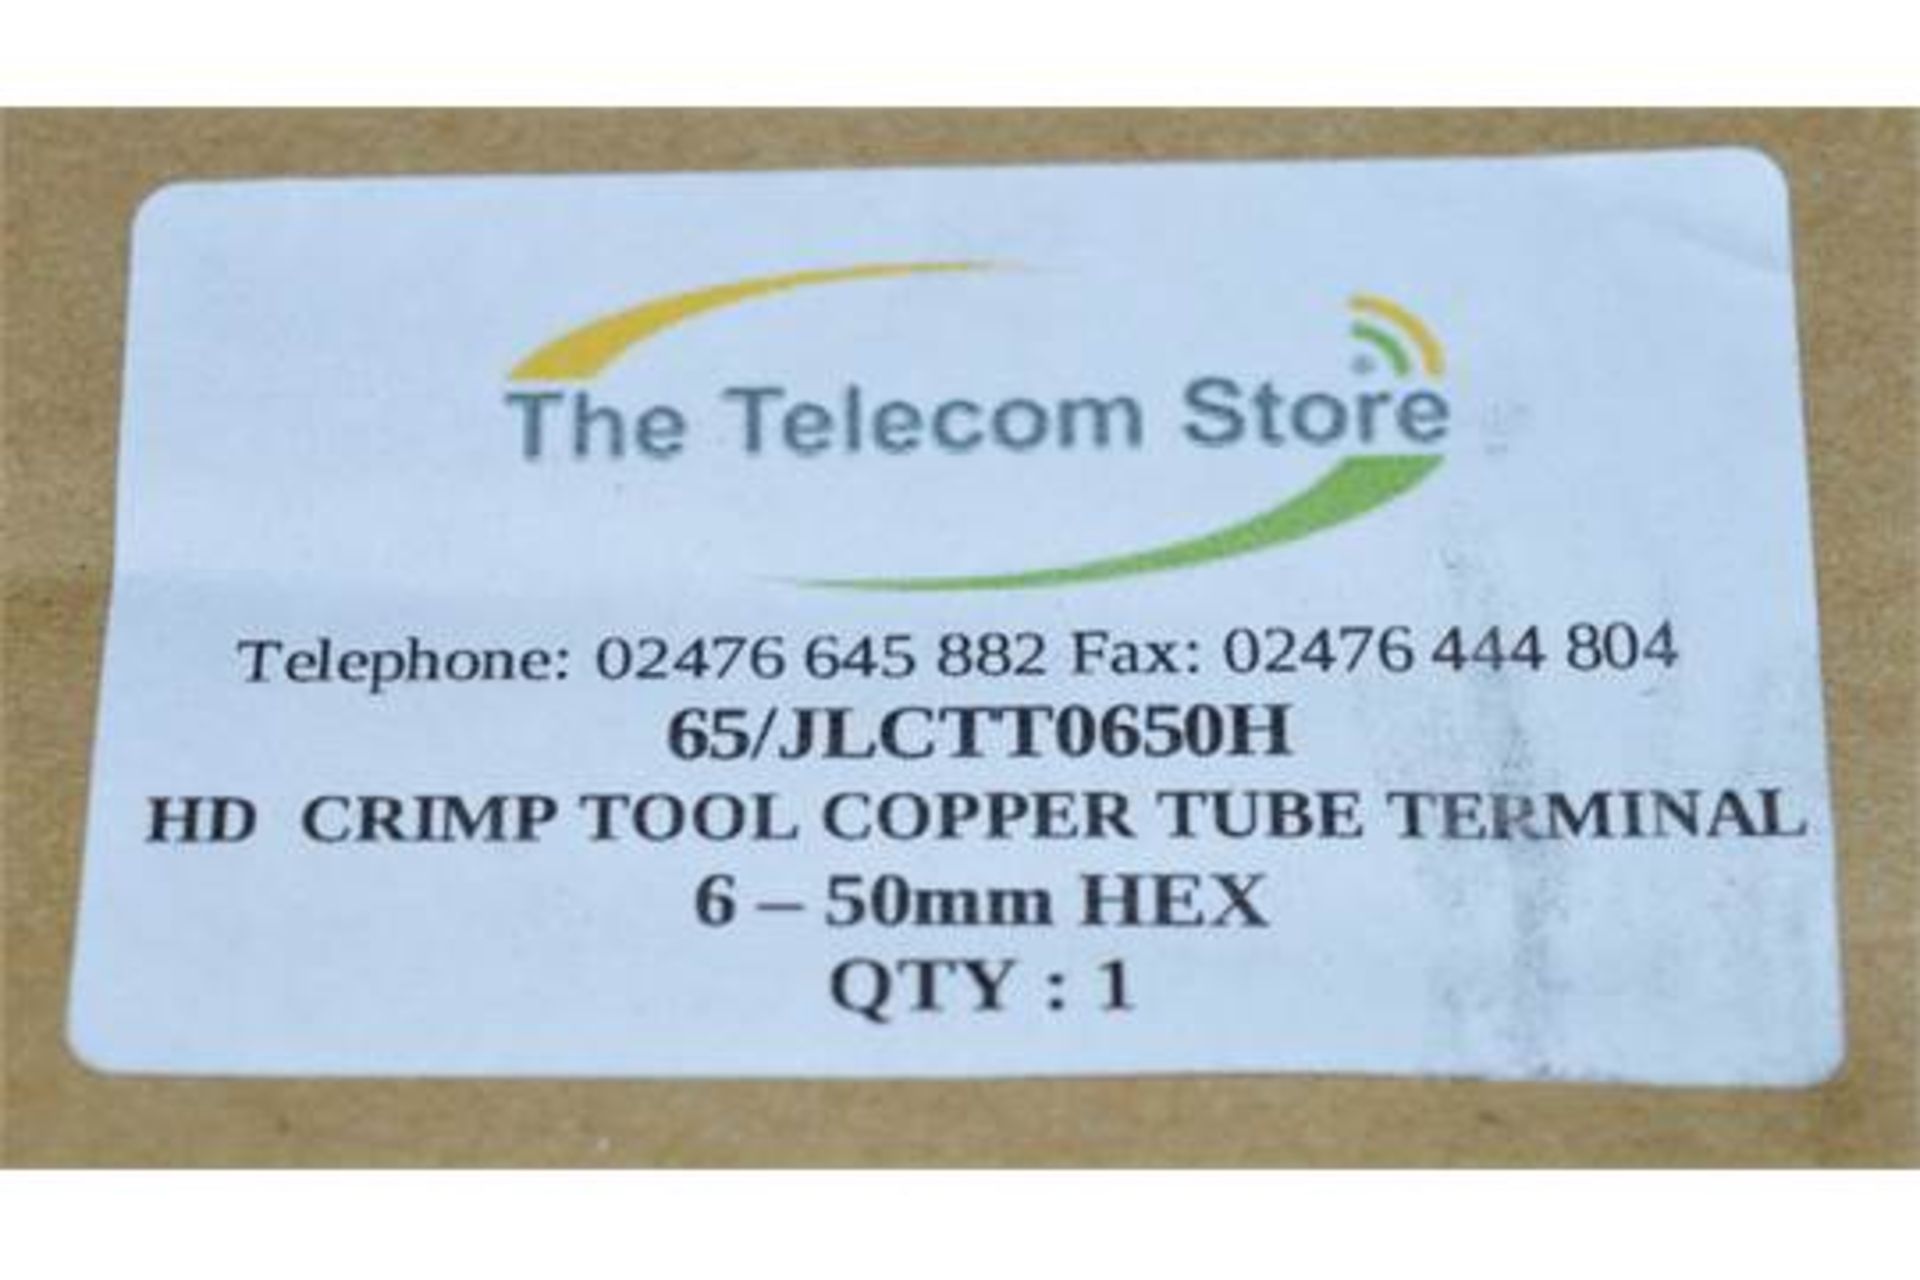 1 x HD Copper Tube Terminal Crimp Tool With Adjustable Hex - 38cm Length - XXX Branded - New and - Image 10 of 10